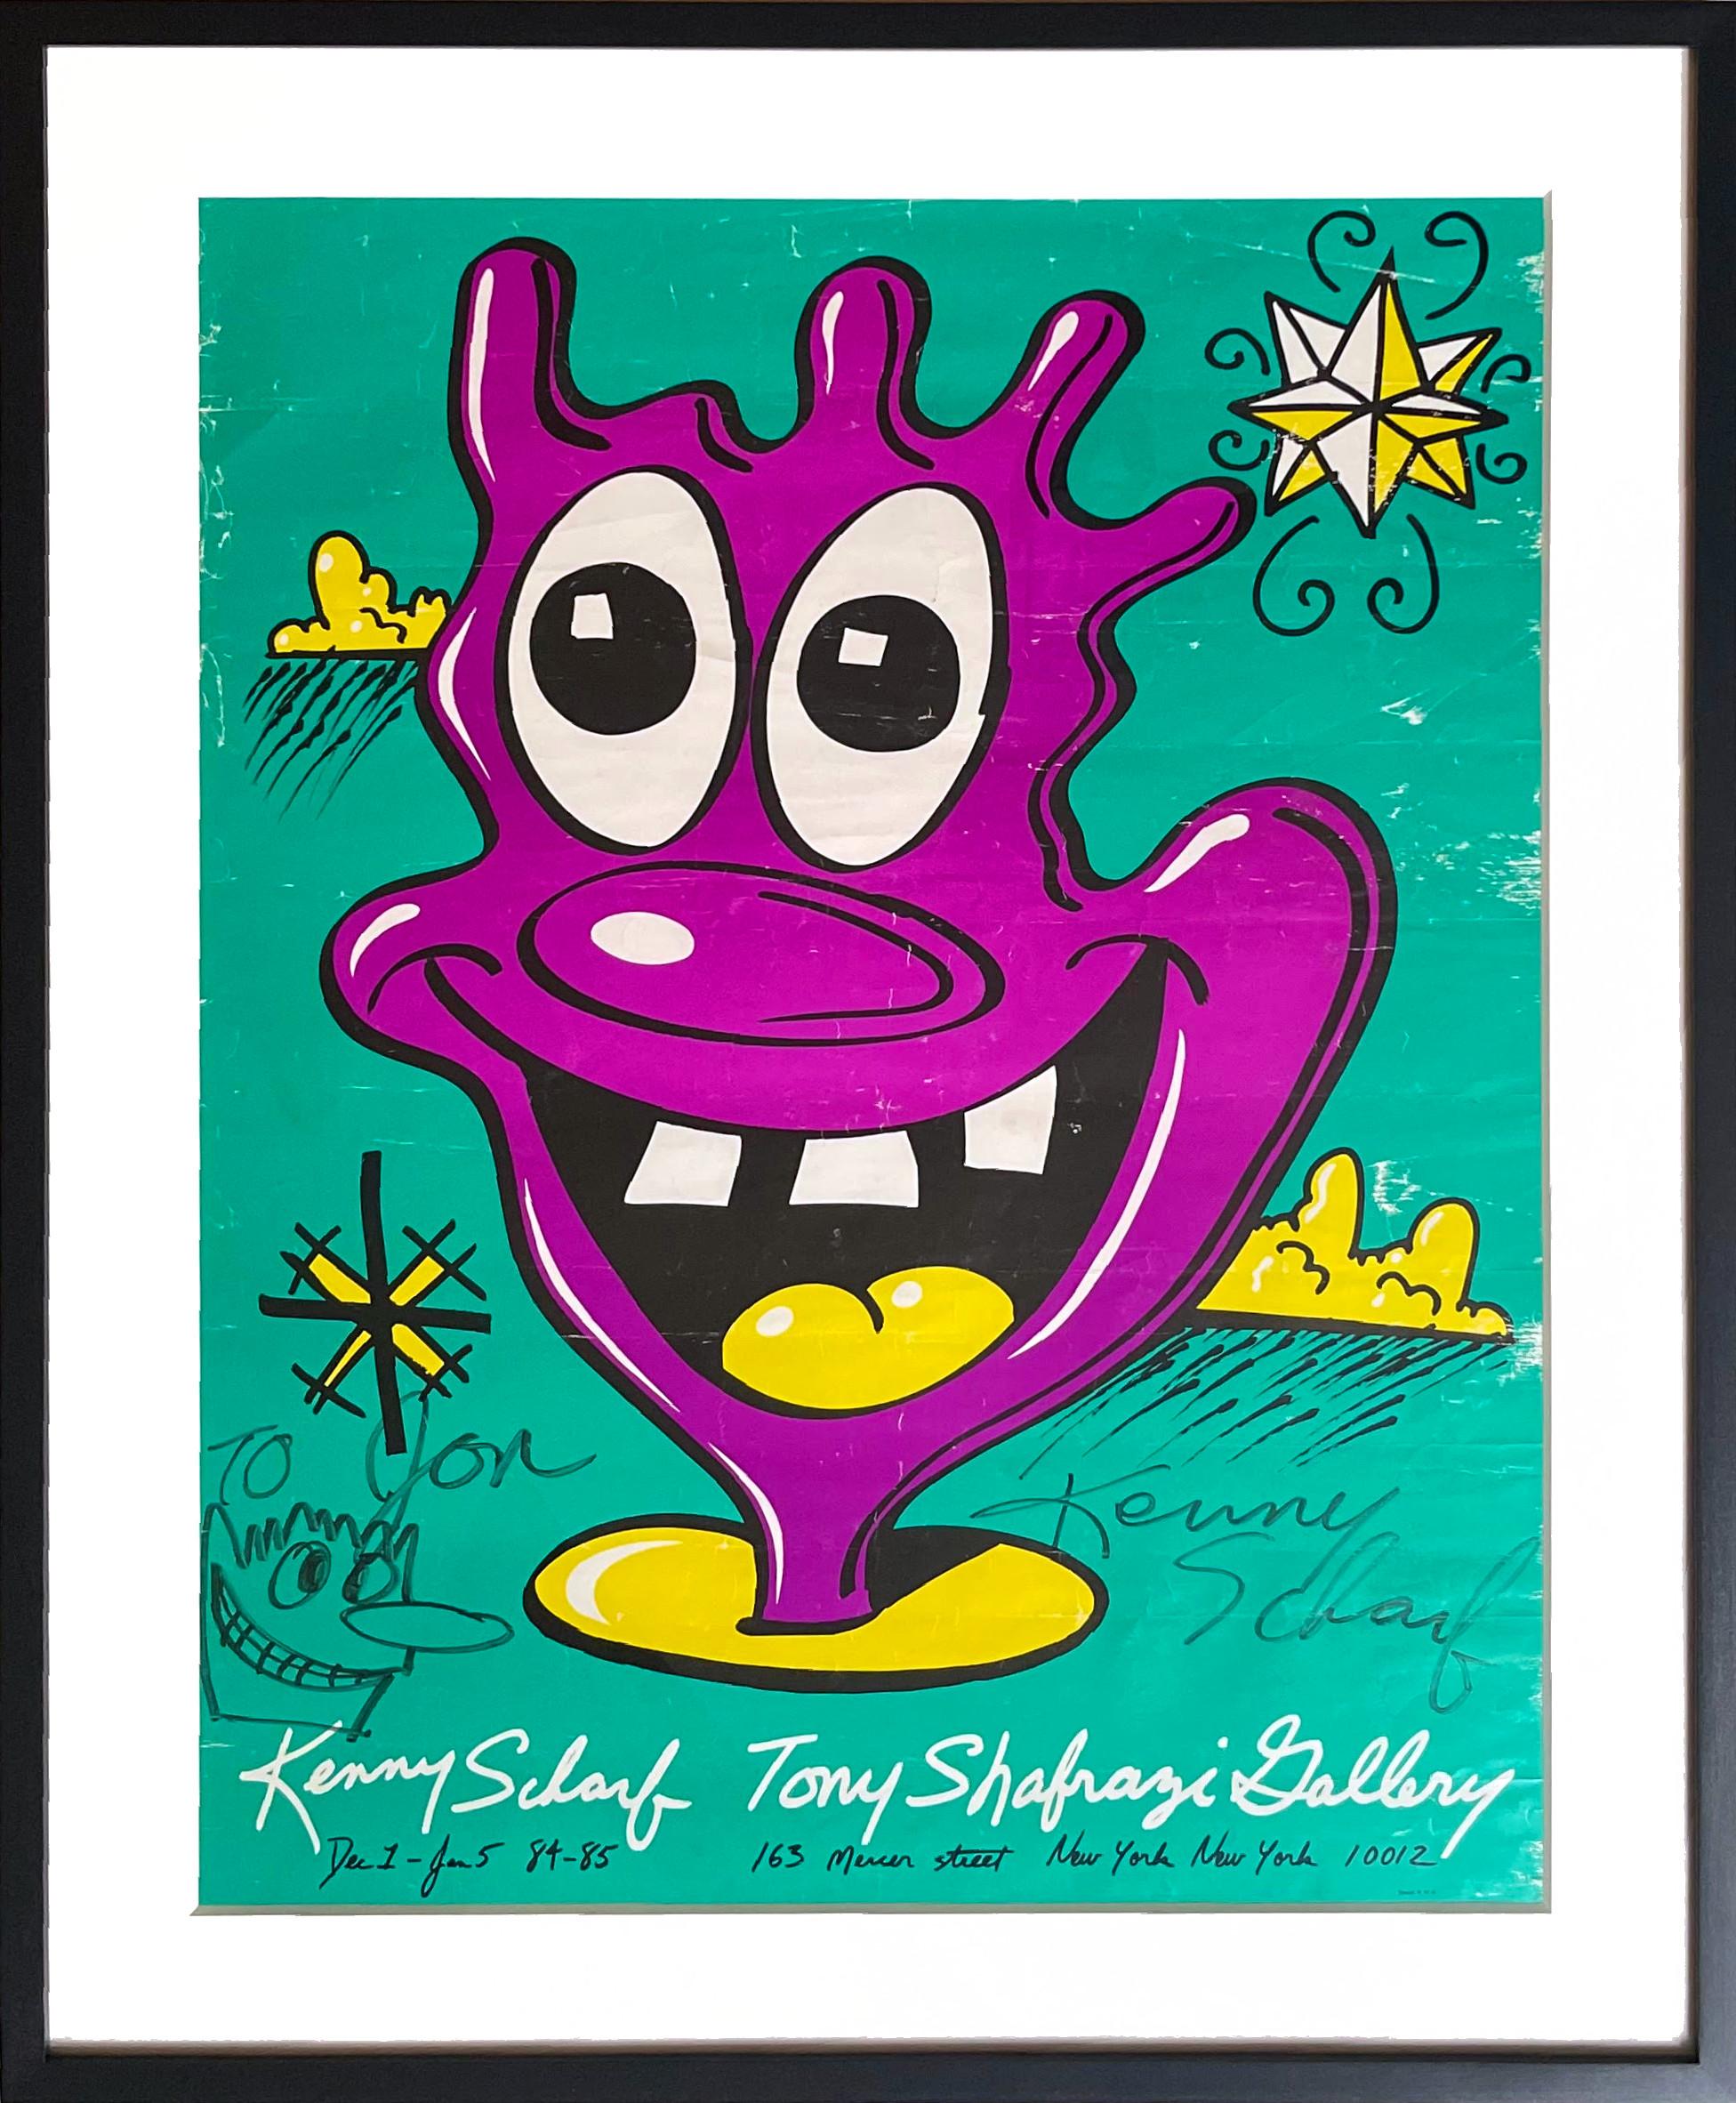 Kenny Scharf Abstract Drawing - Unique drawing on Tony Shafrazi poster, signed & inscribed to Warhol's boyfriend